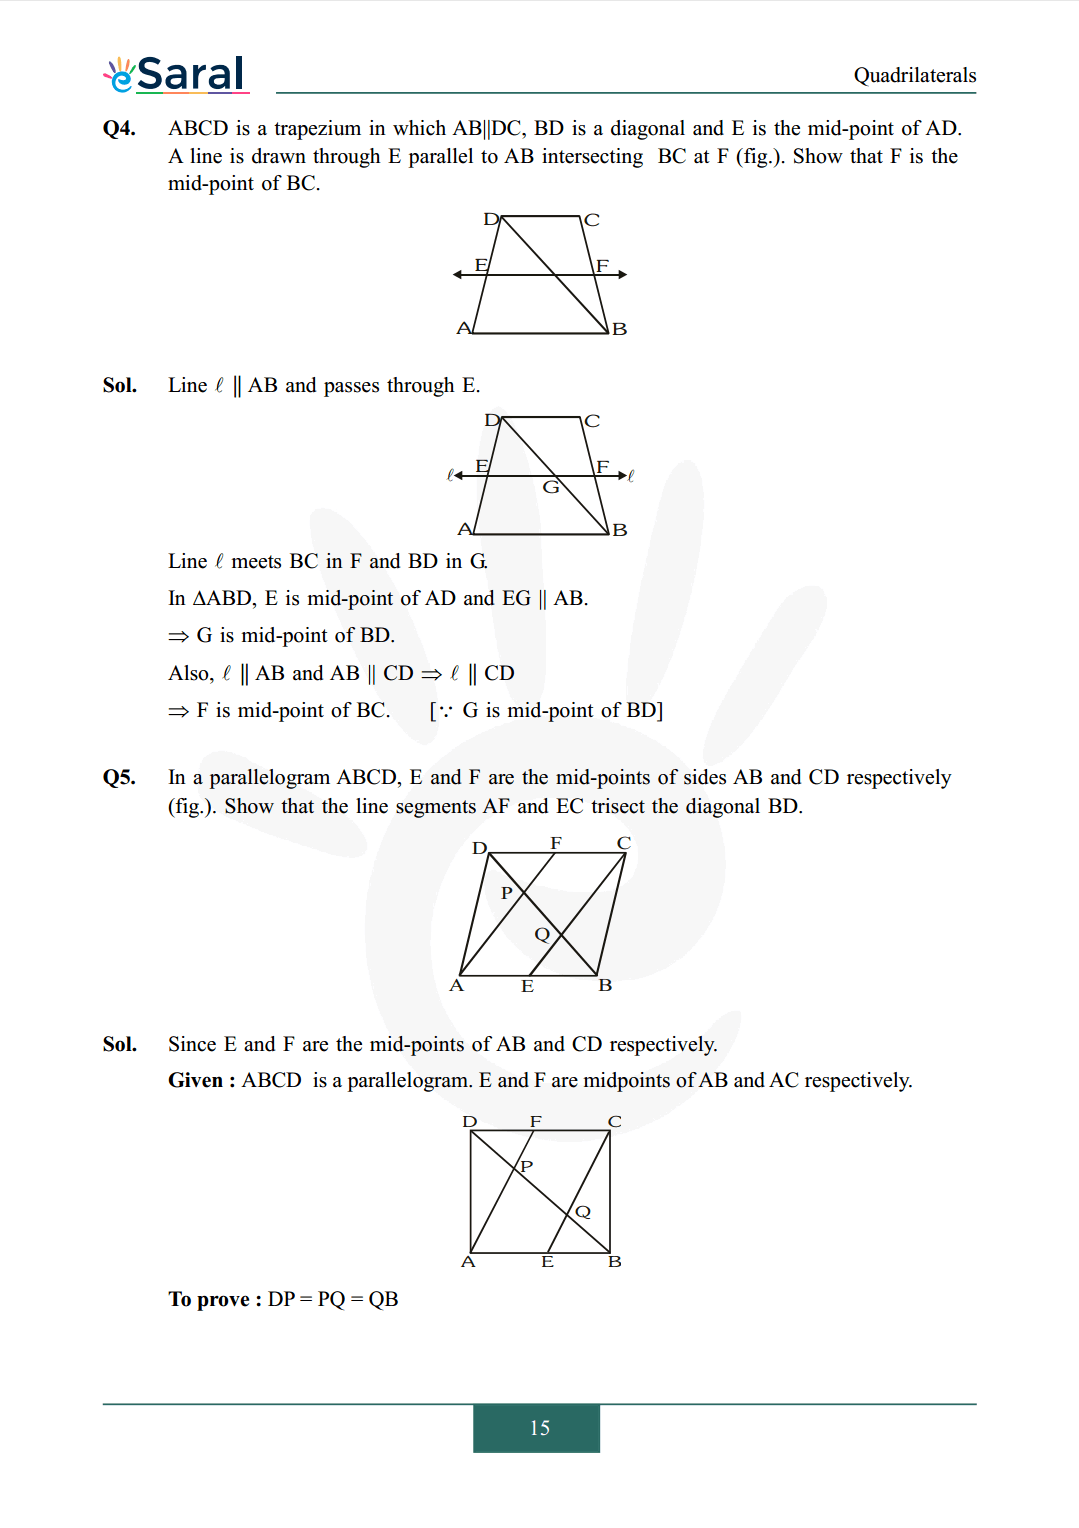 Class 9 maths chapter 8 exercise 8.2 solutions Image 4